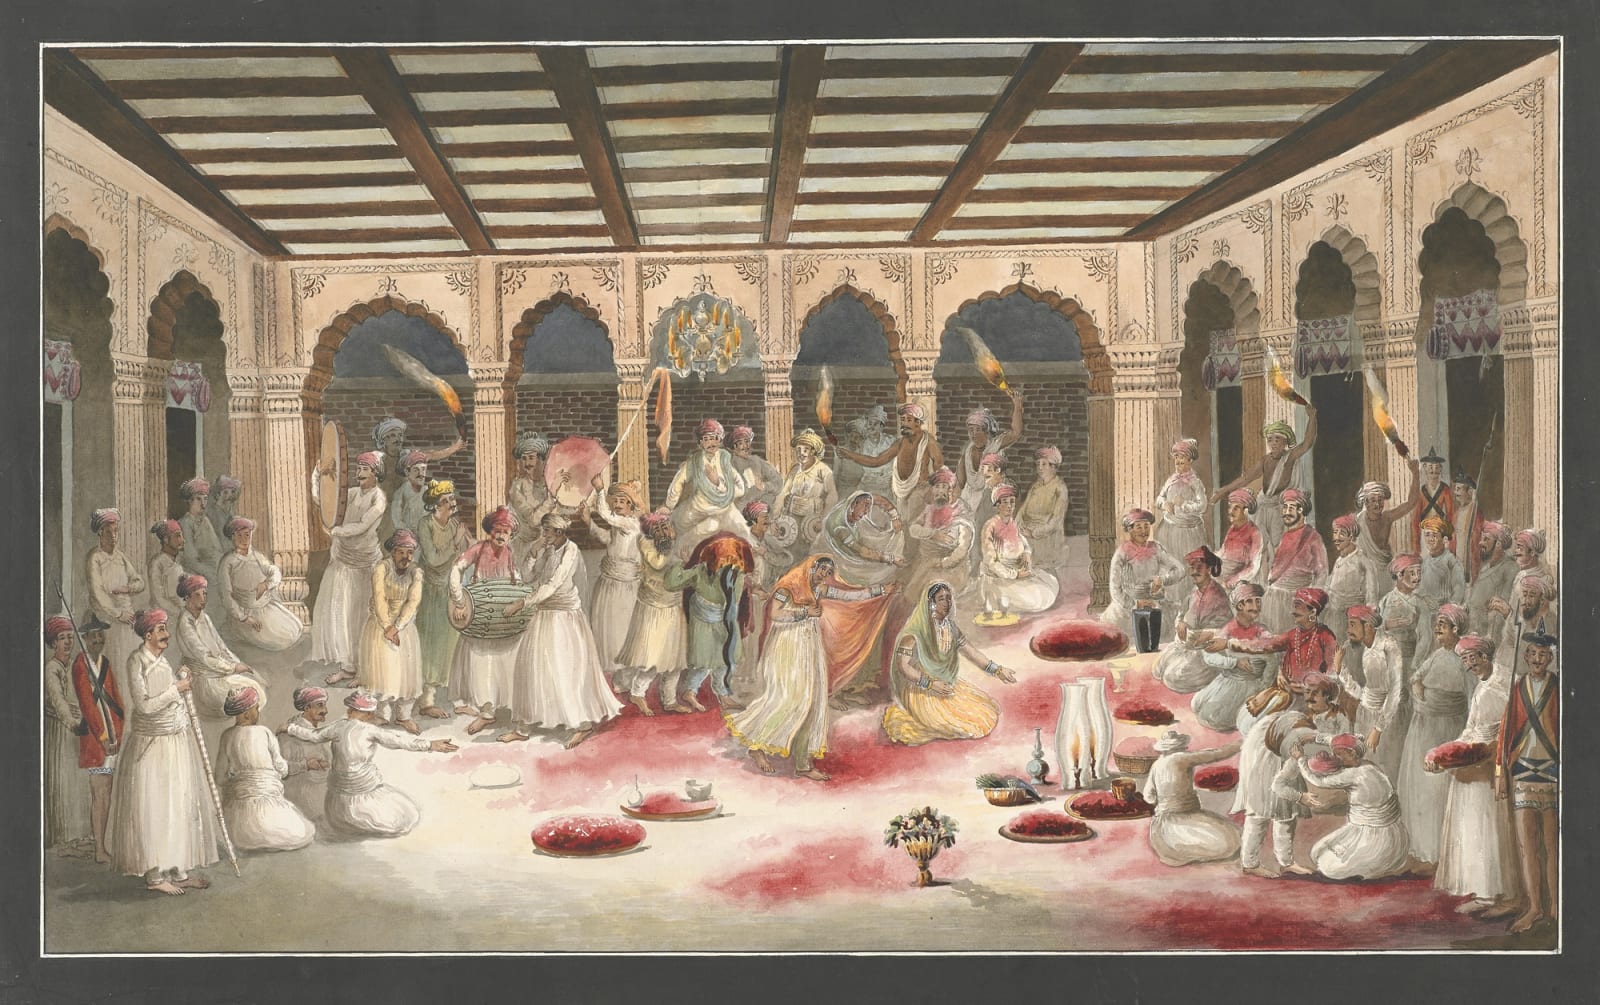 Holi festival in the palace at Murshidabad before the Nawab, with coloured powder flung around. Bengal sepoys standing about., Murshidabad, 1795–1810